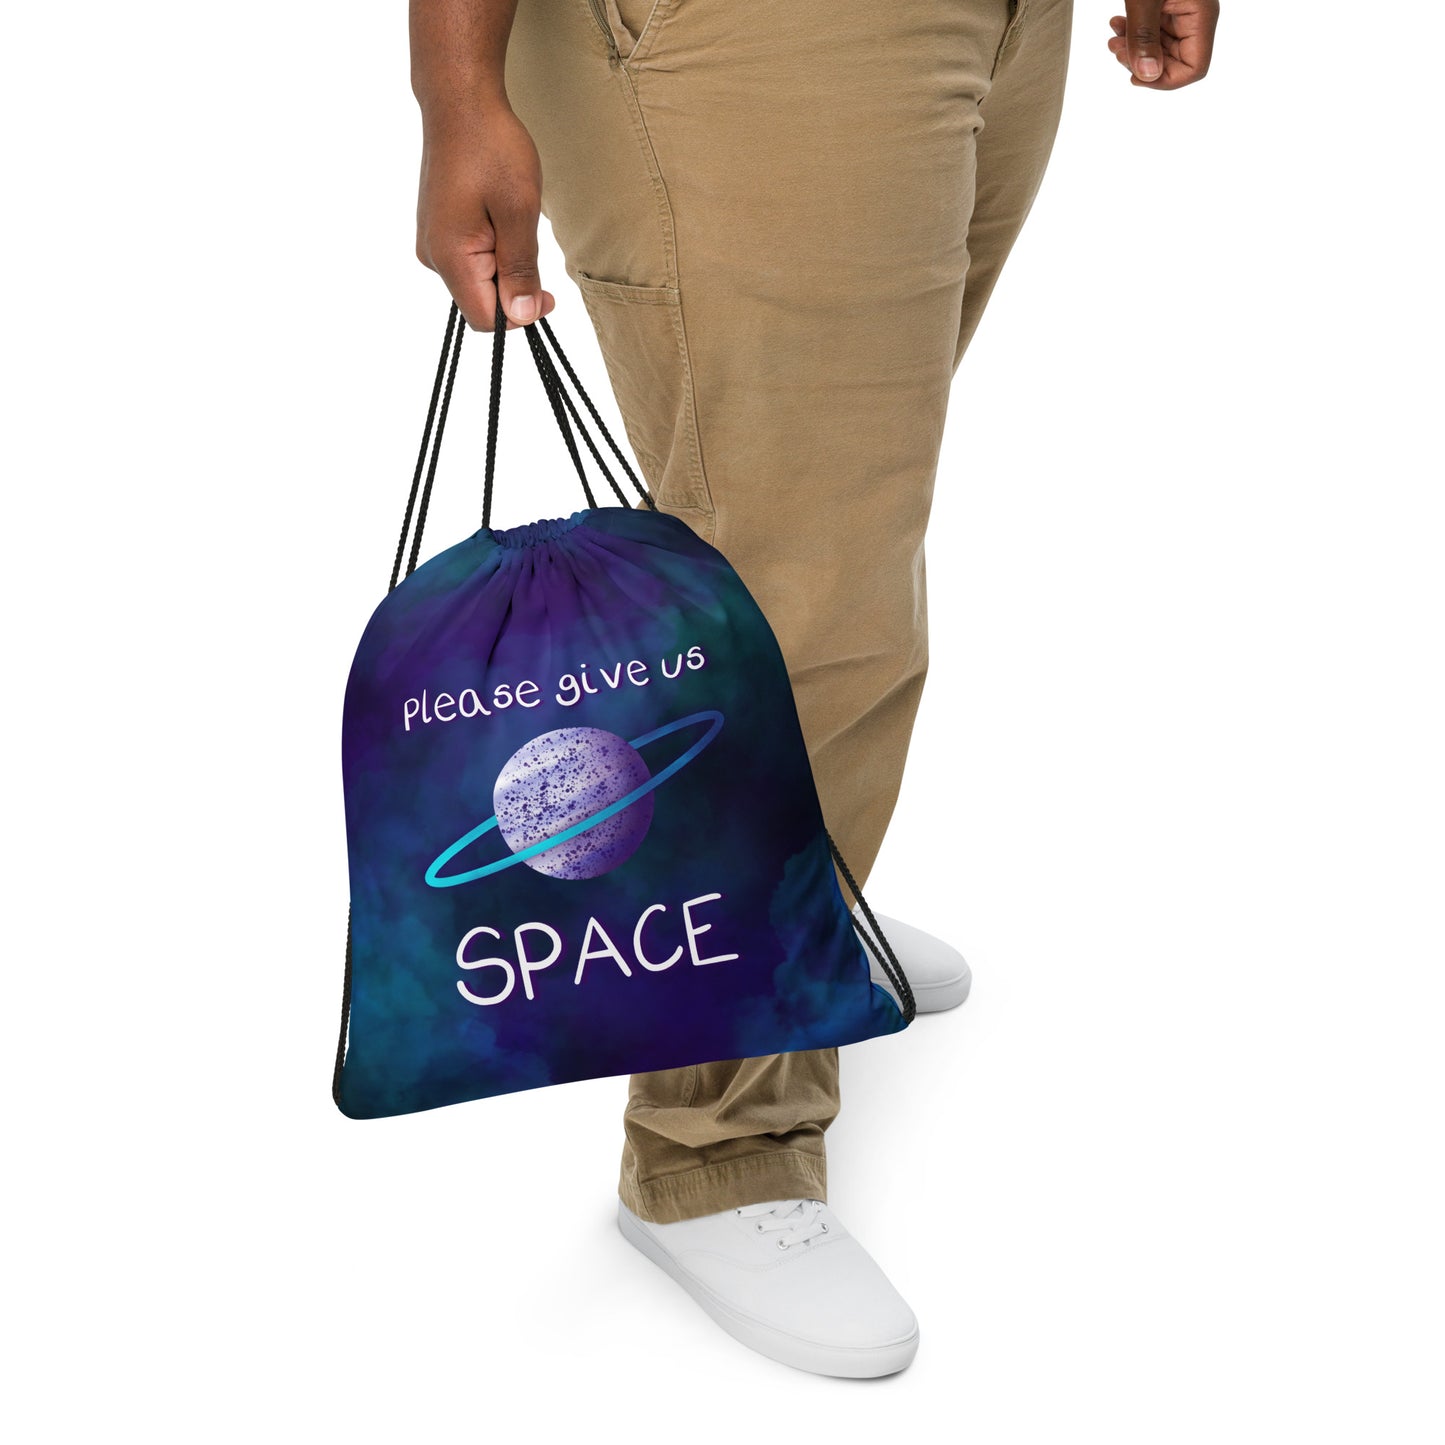 Please give us space Drawstring bag